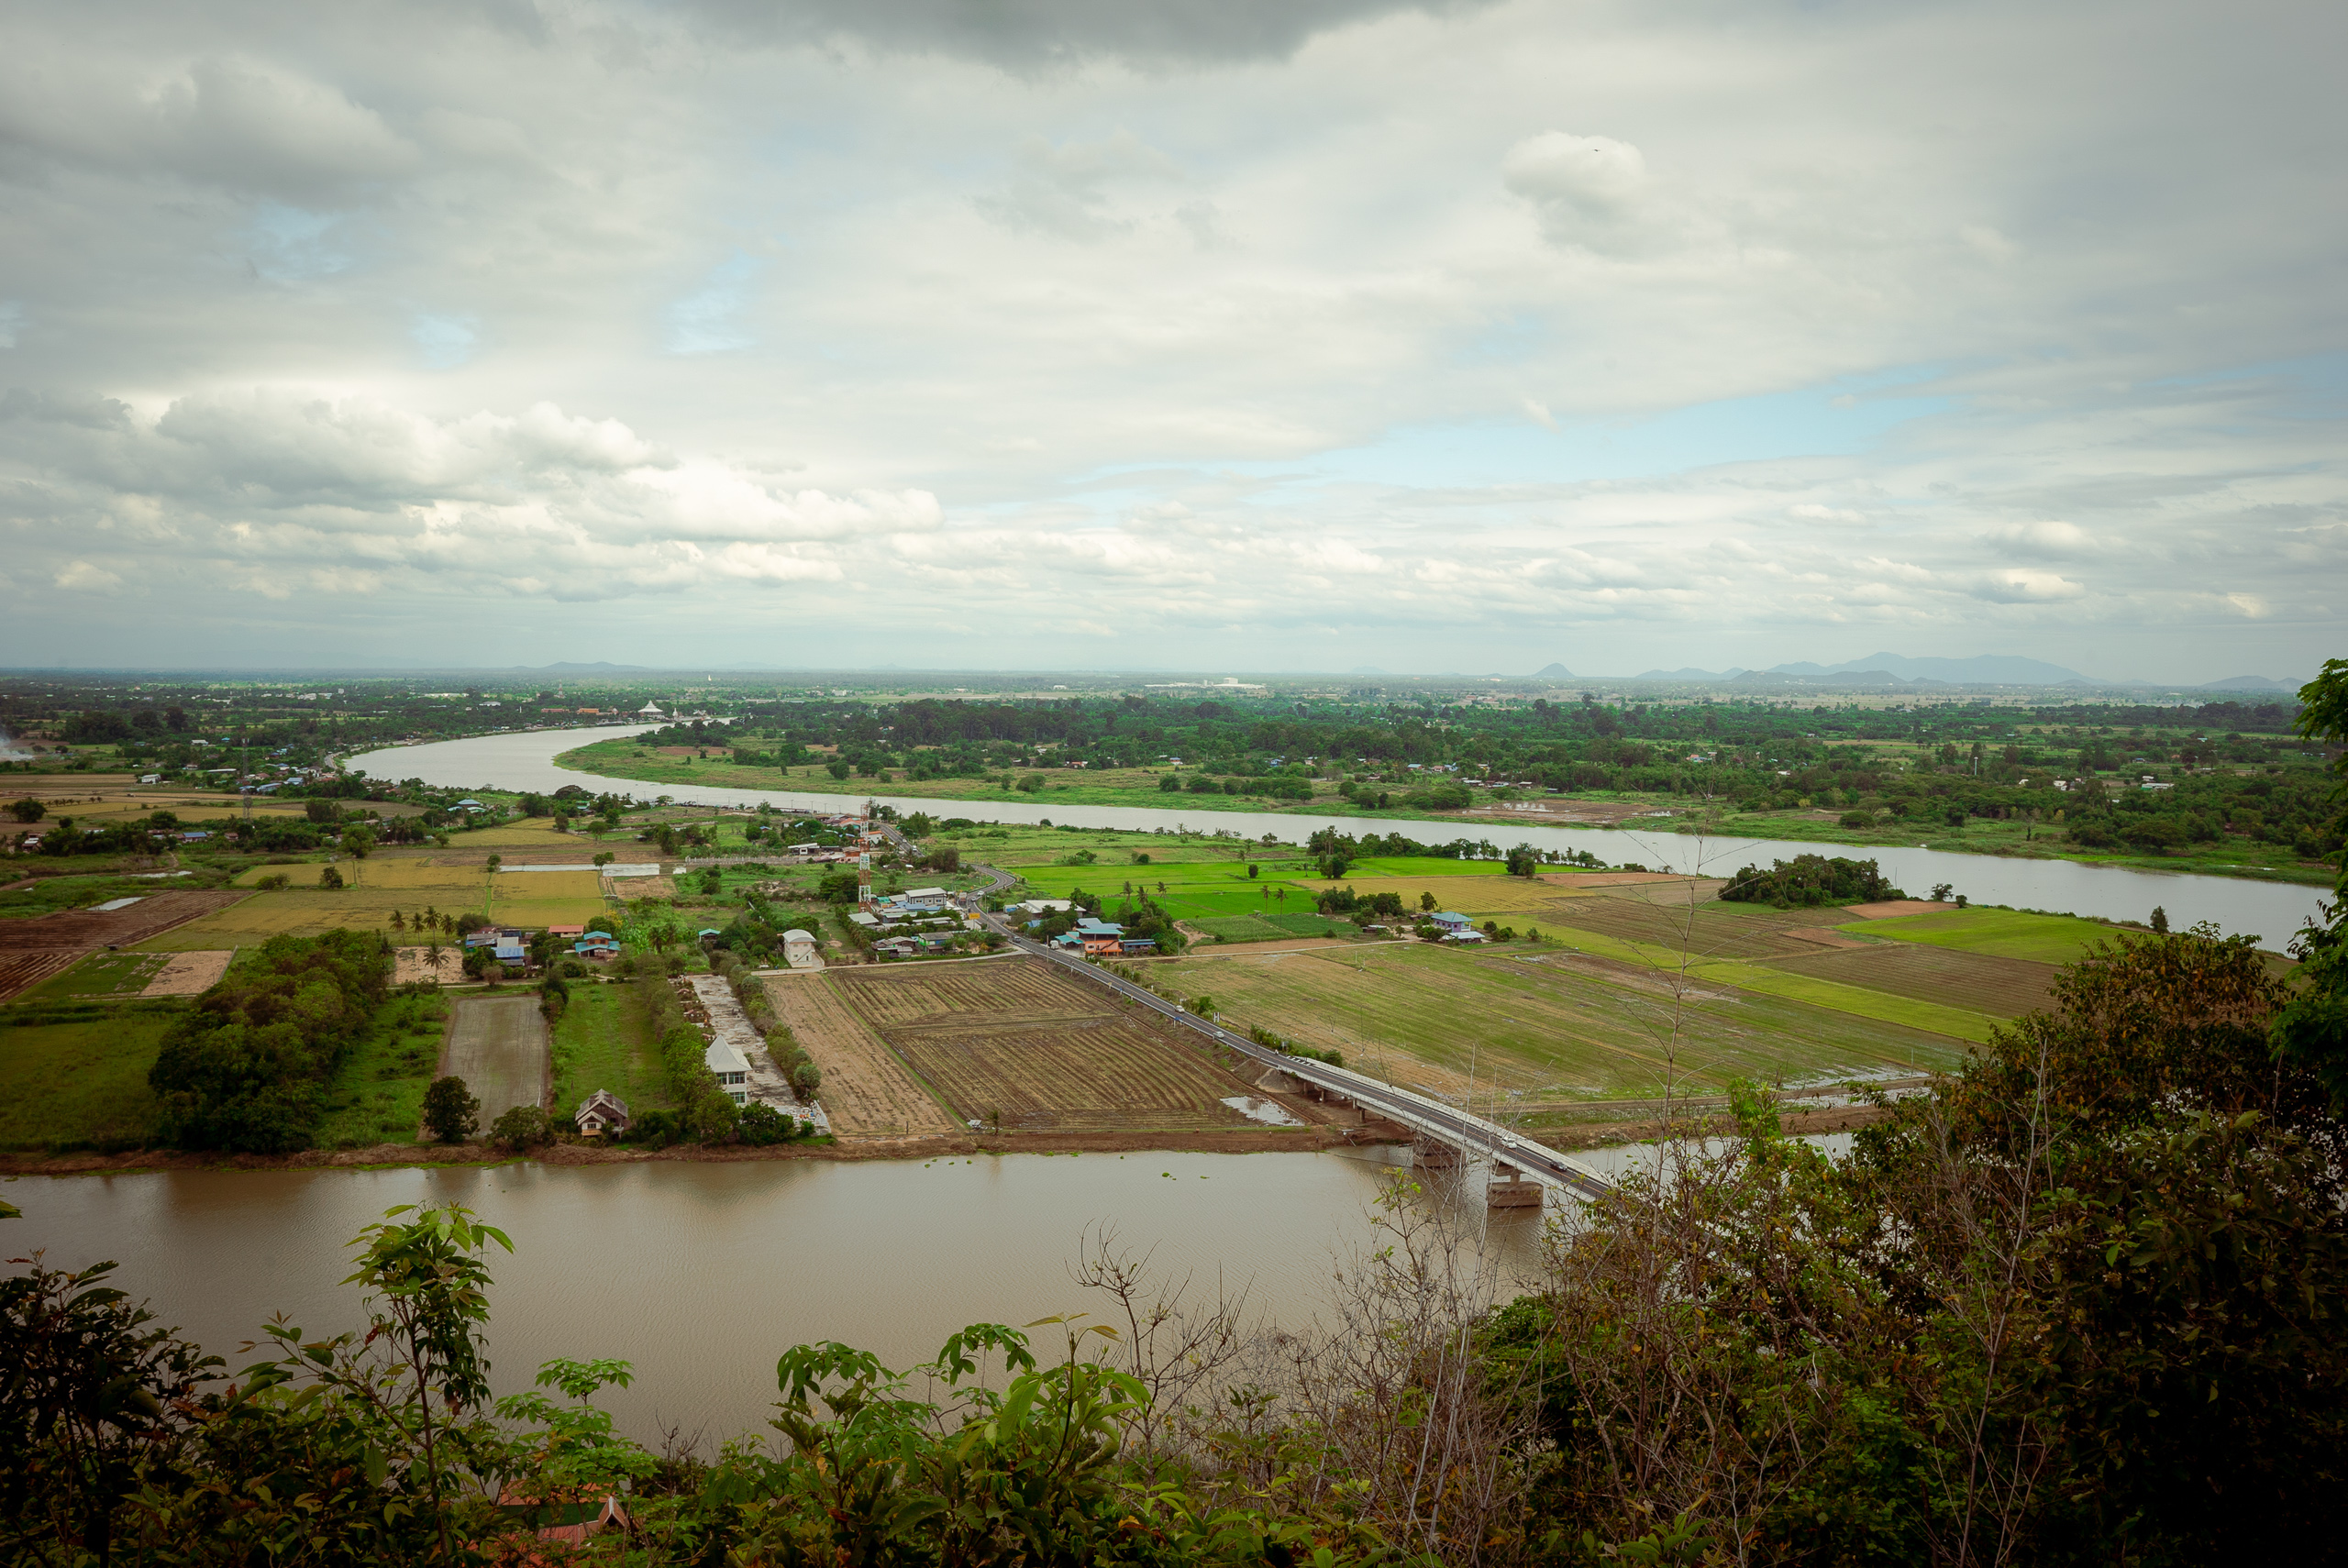 rows of agricultural fields on the bank of winding river